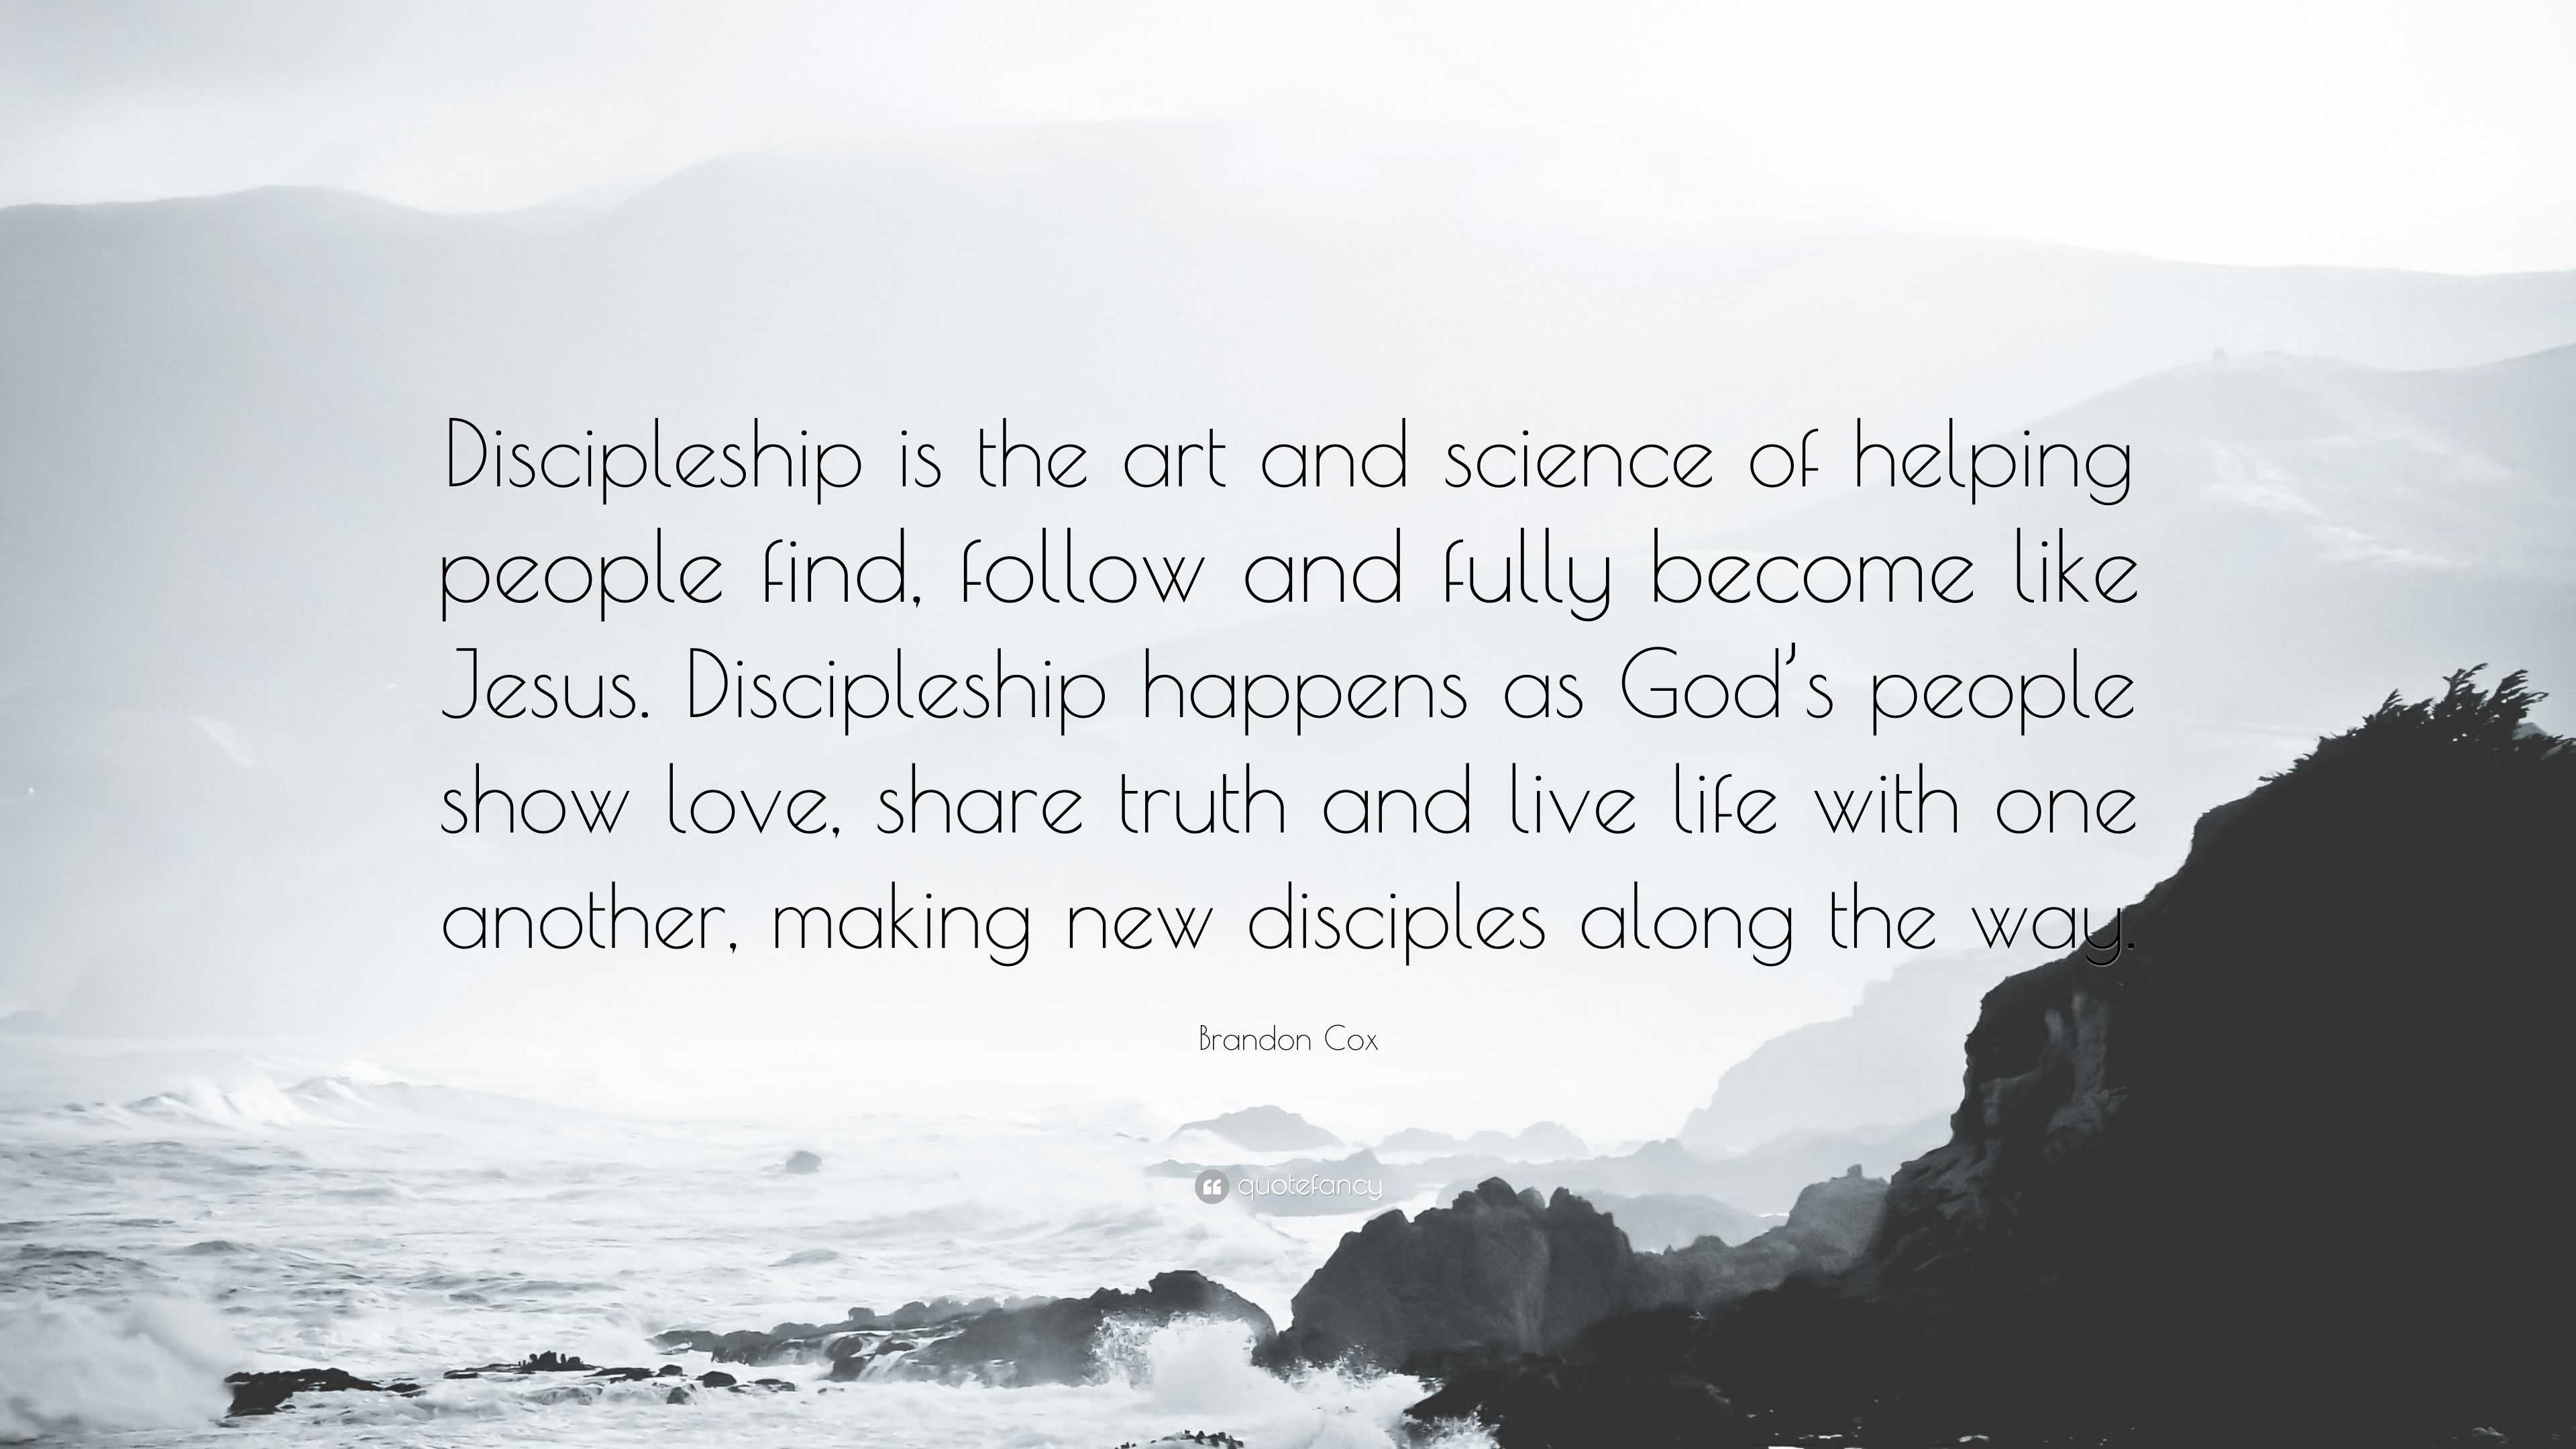 Brandon Cox Quote “Discipleship is the art and science of helping people find